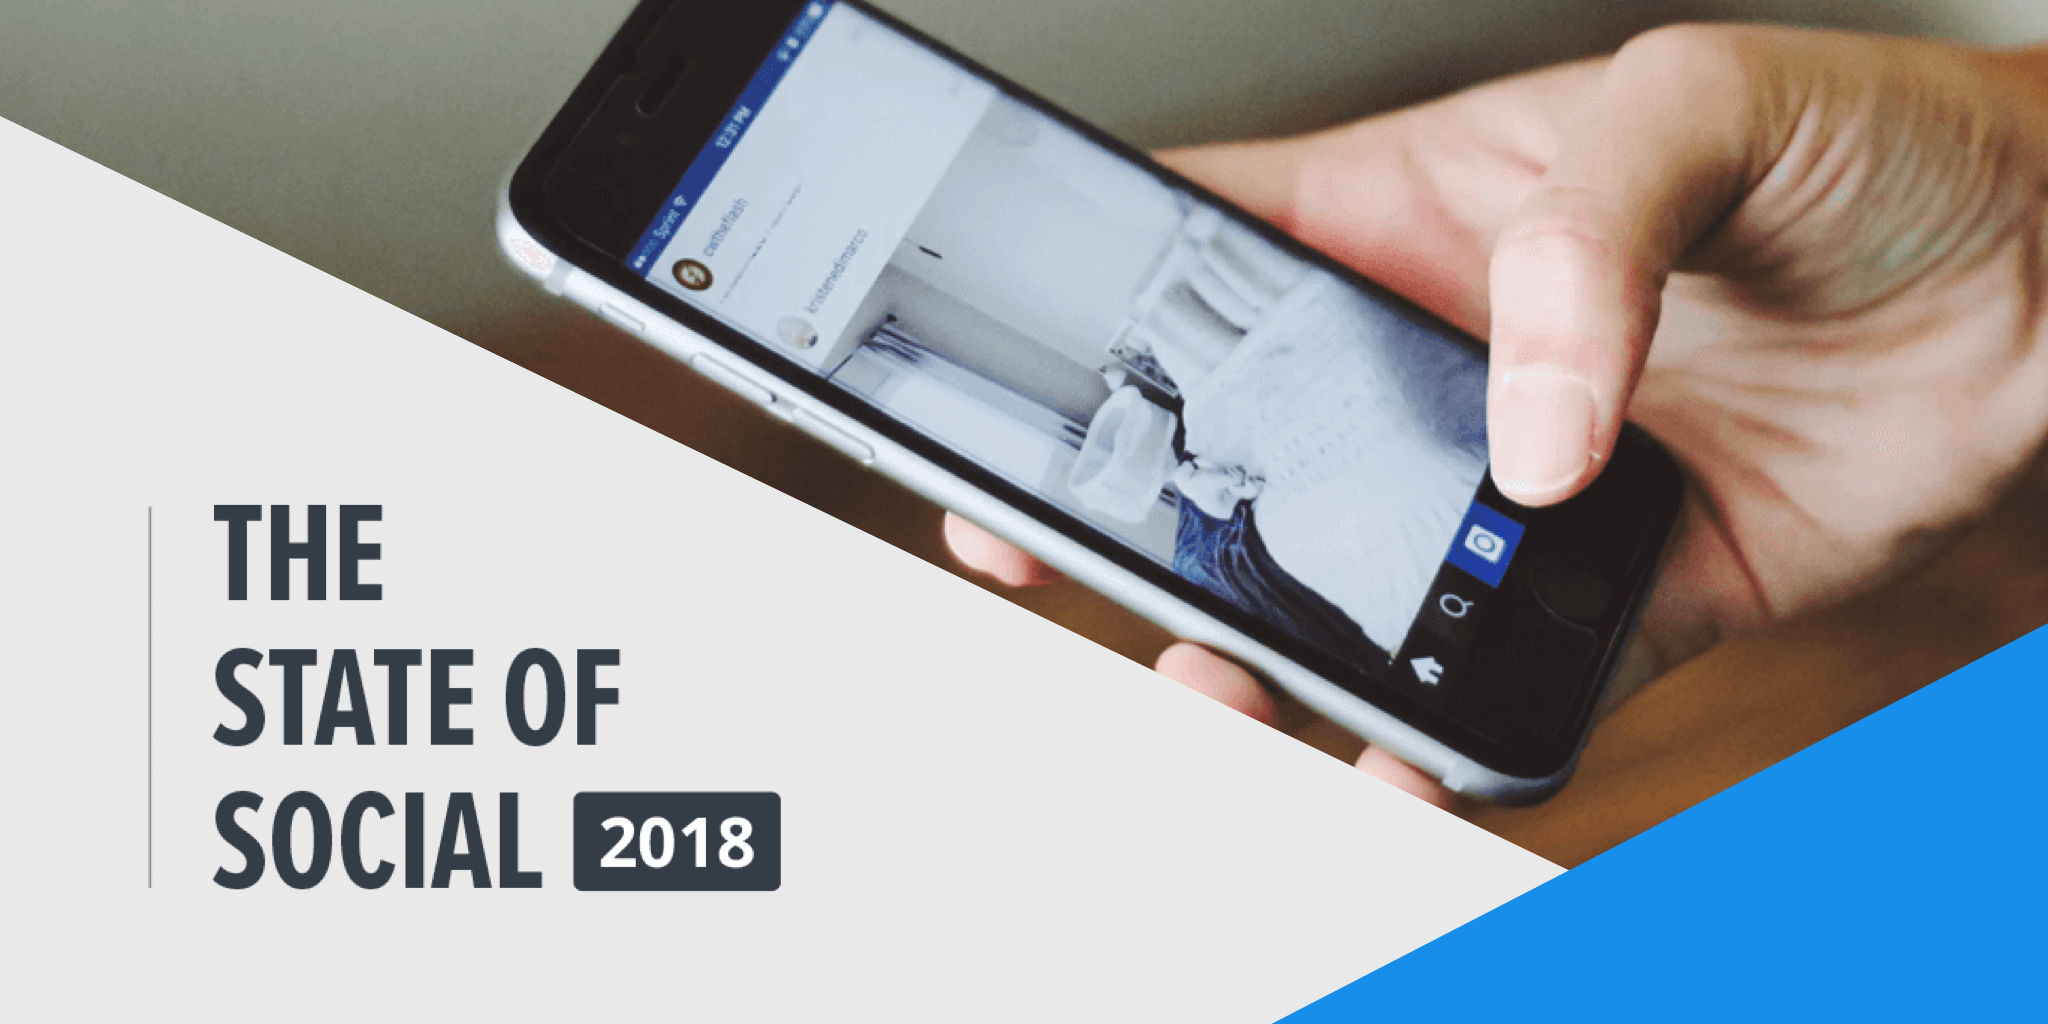 The State of Social 2018 Report: Your Guide to Latest Social Media Marketing Research [New Data]